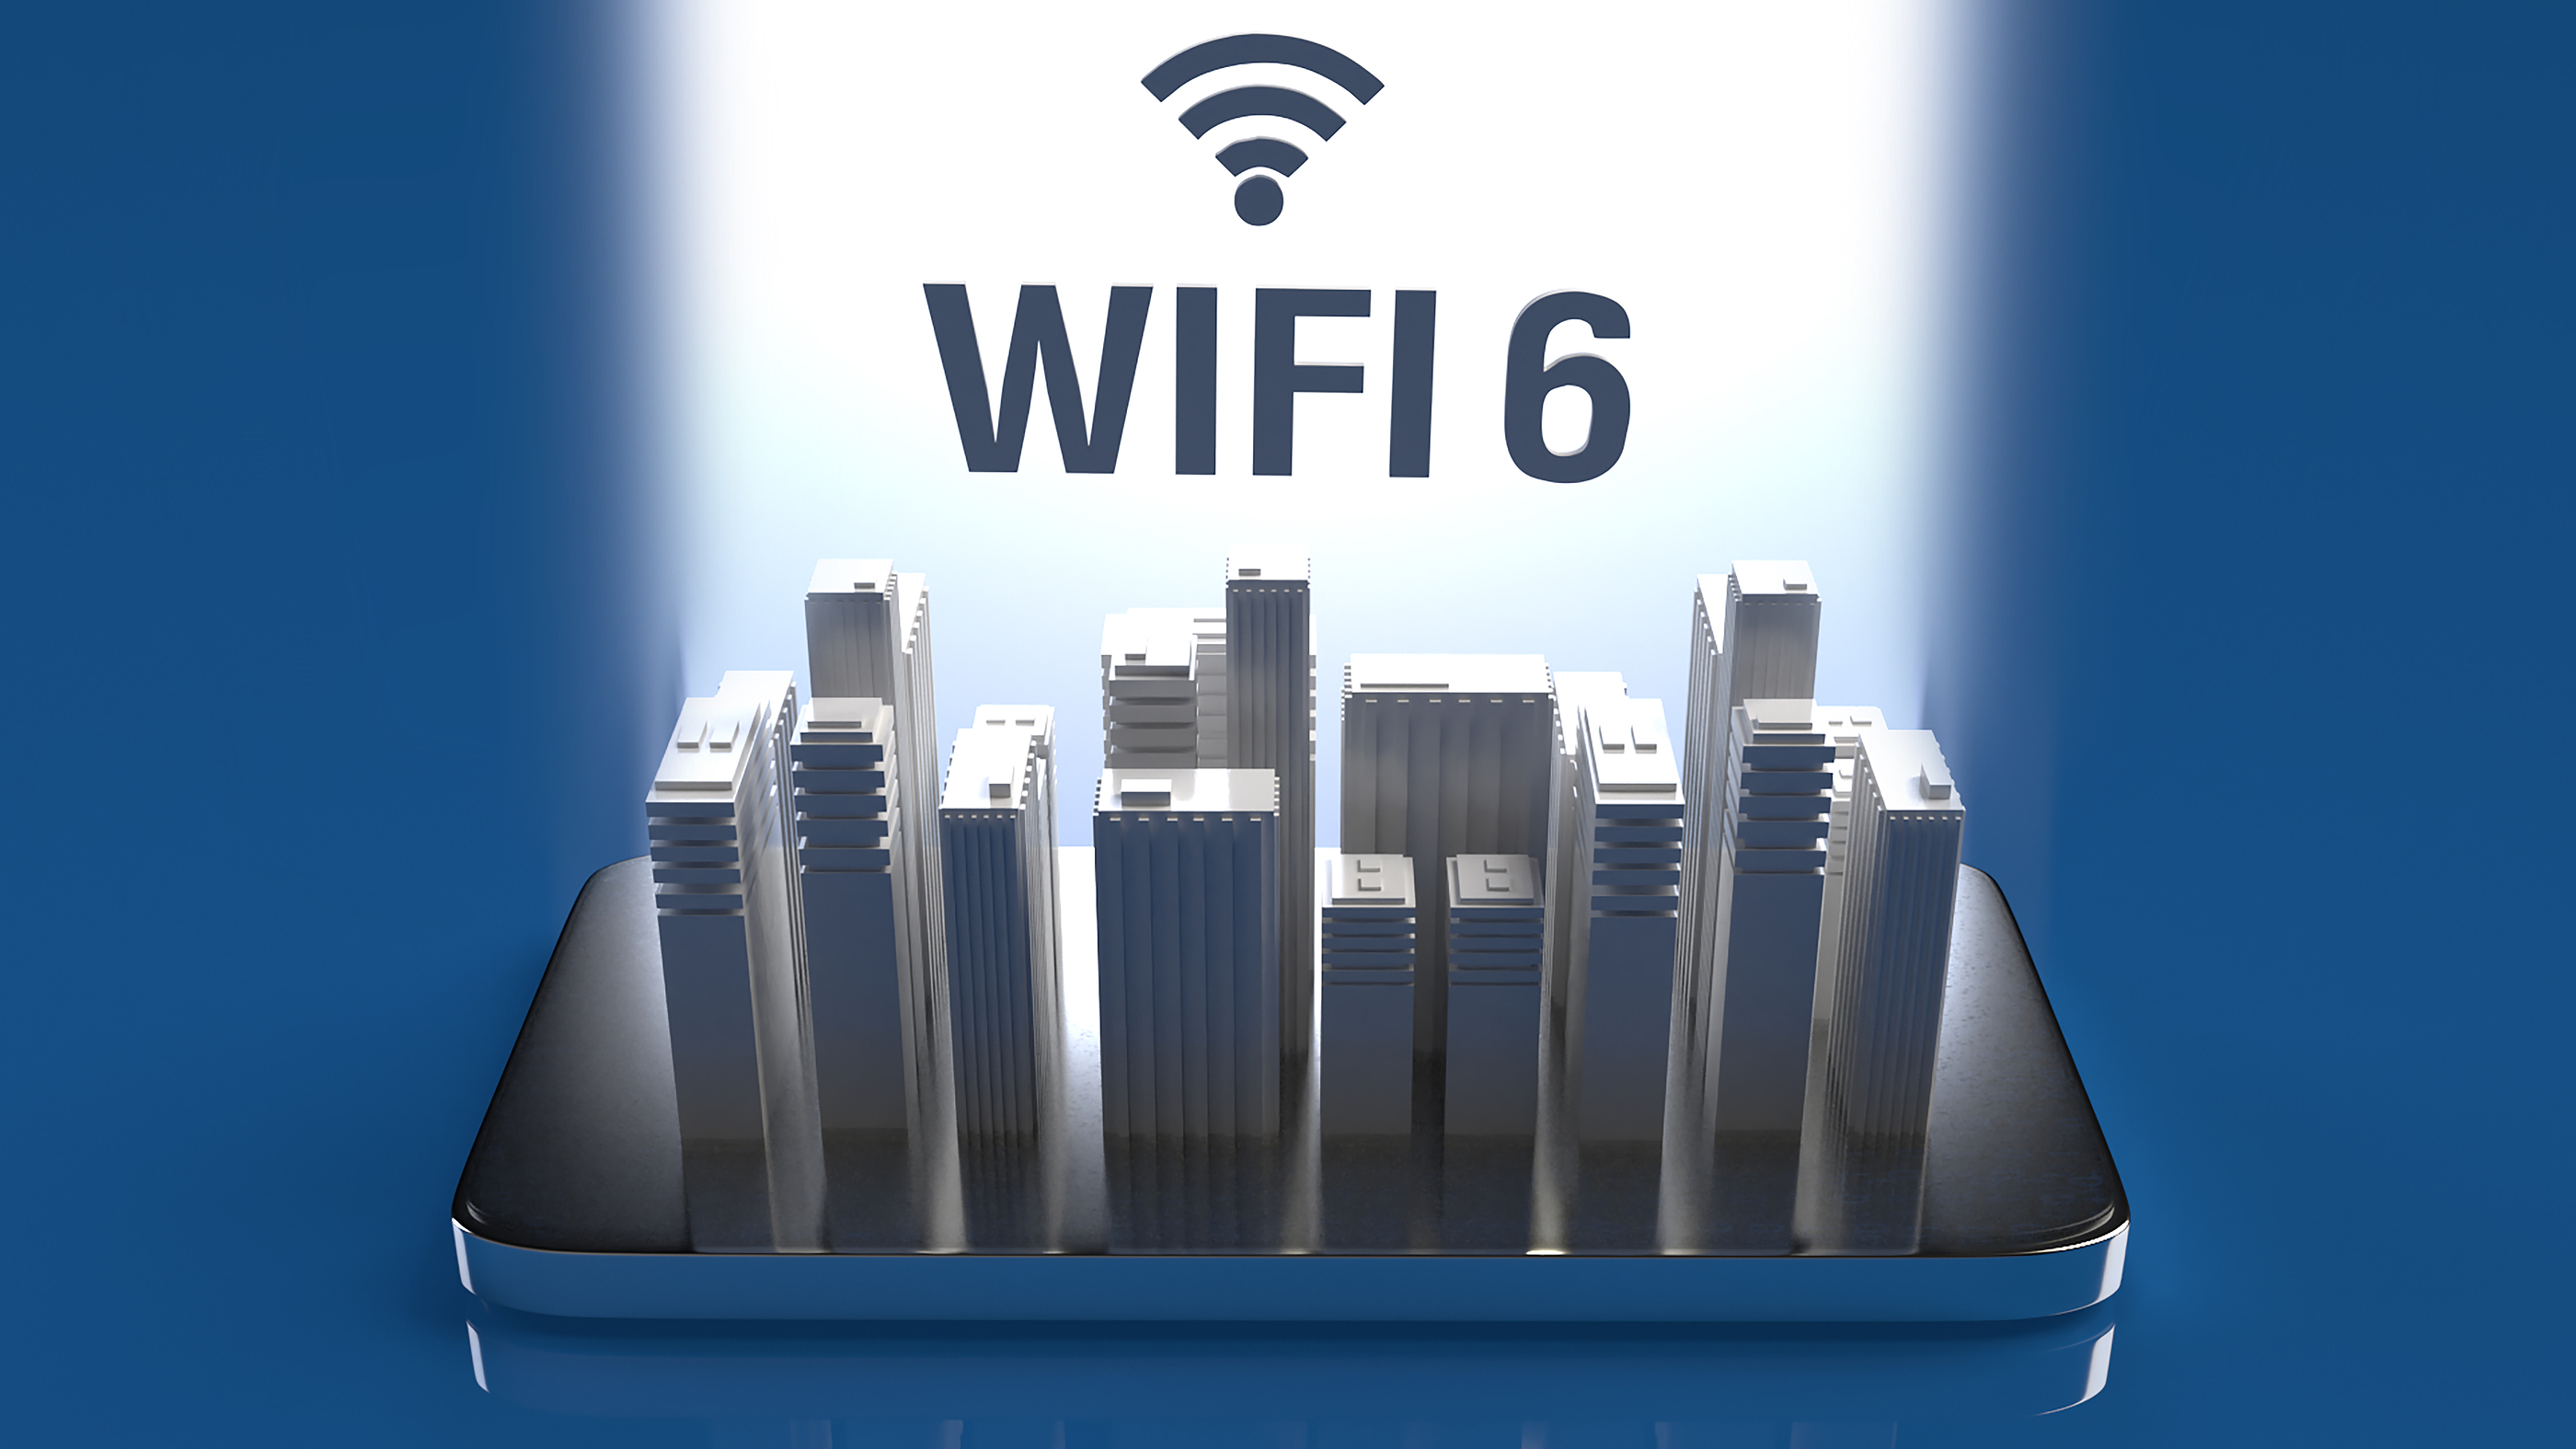 What Amazing Improvements Can You Expect with the Release of Wi-Fi 6?